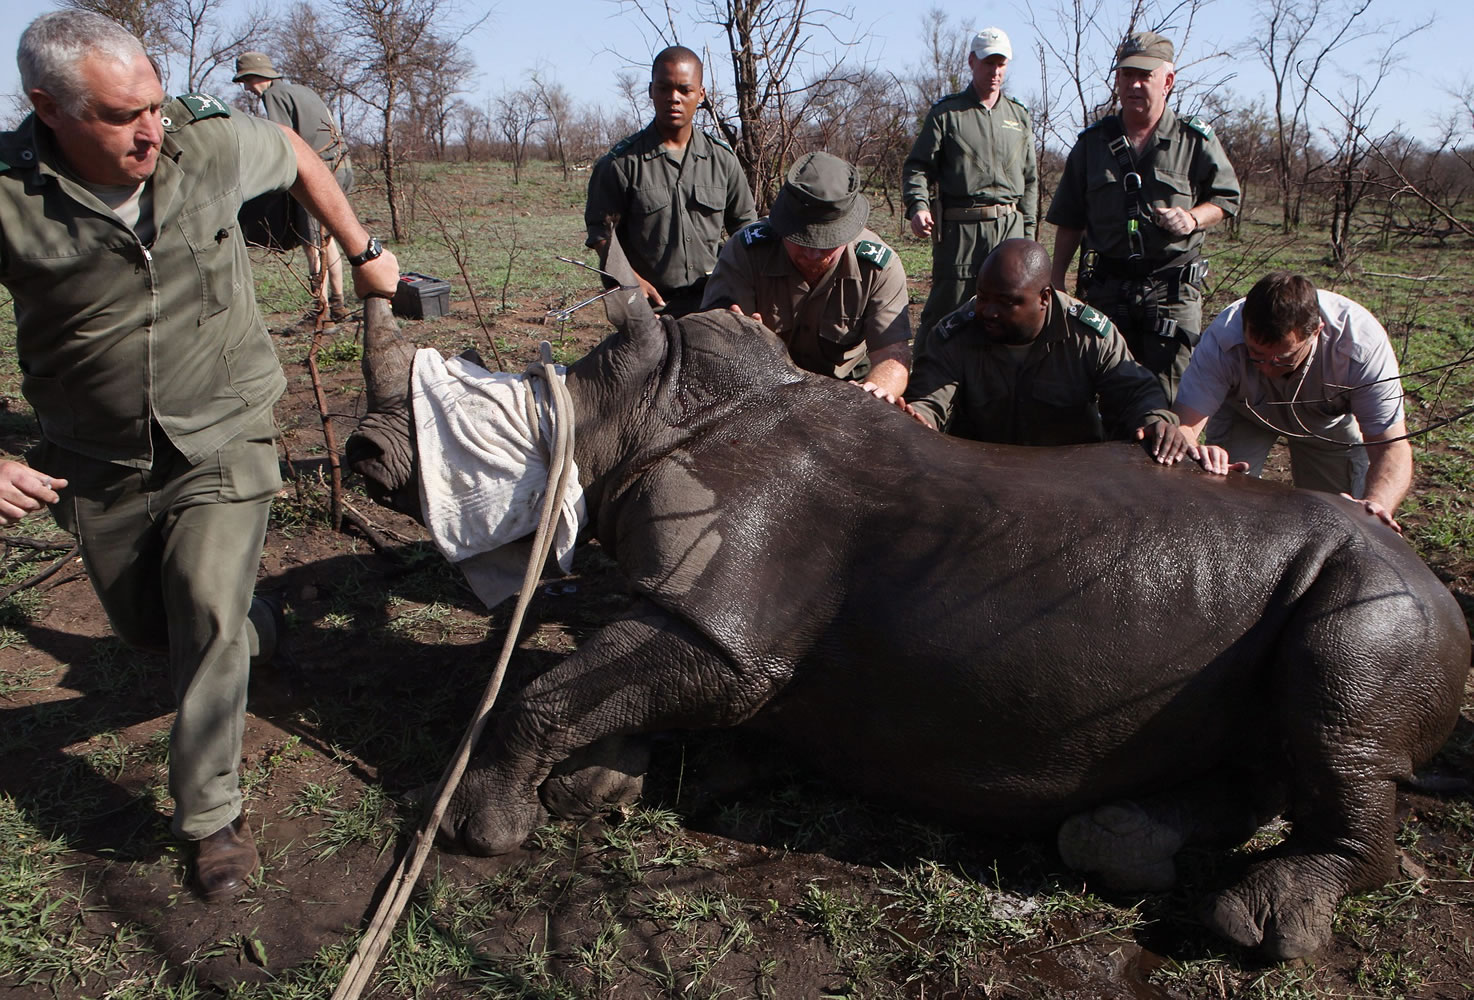 Rangers help a rhino to its feet after it was darted Thursday near Skukuza, South Africa.